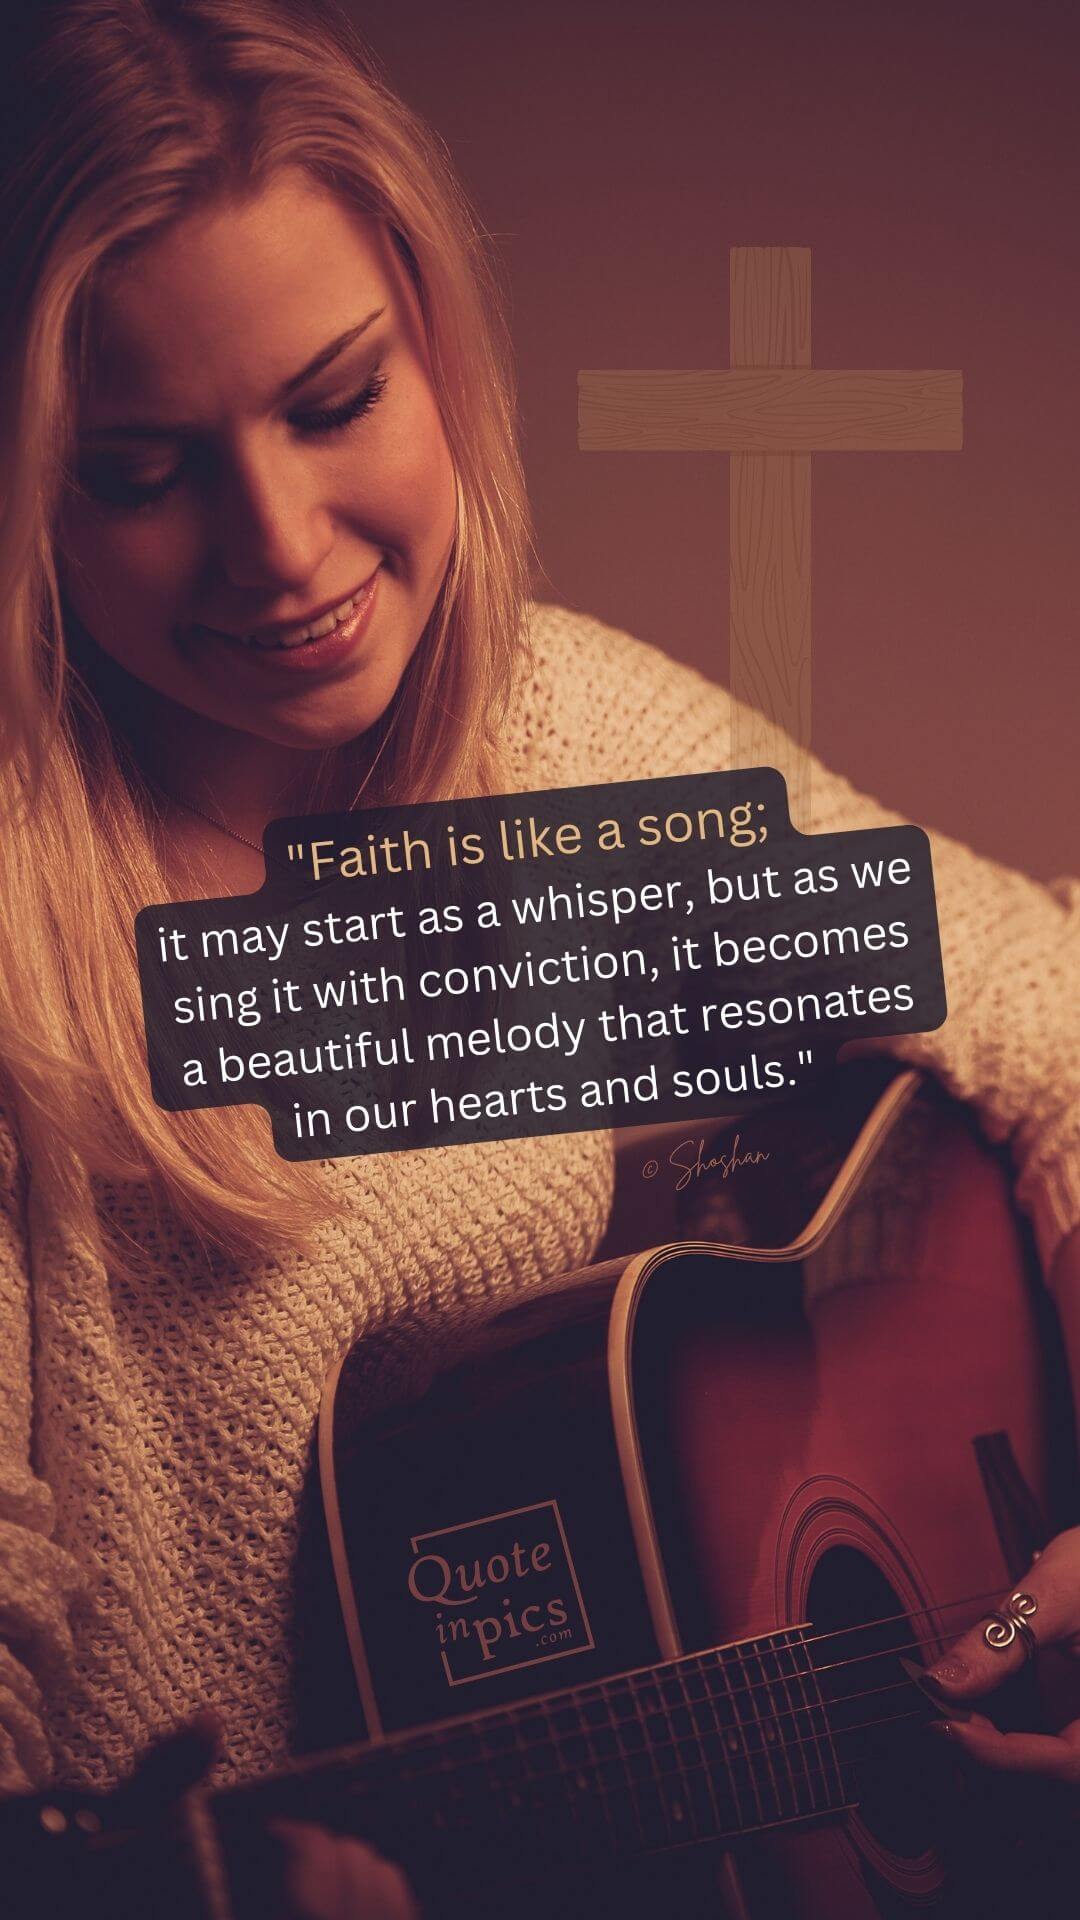 Faith starts as a whisper, it becomes a melody